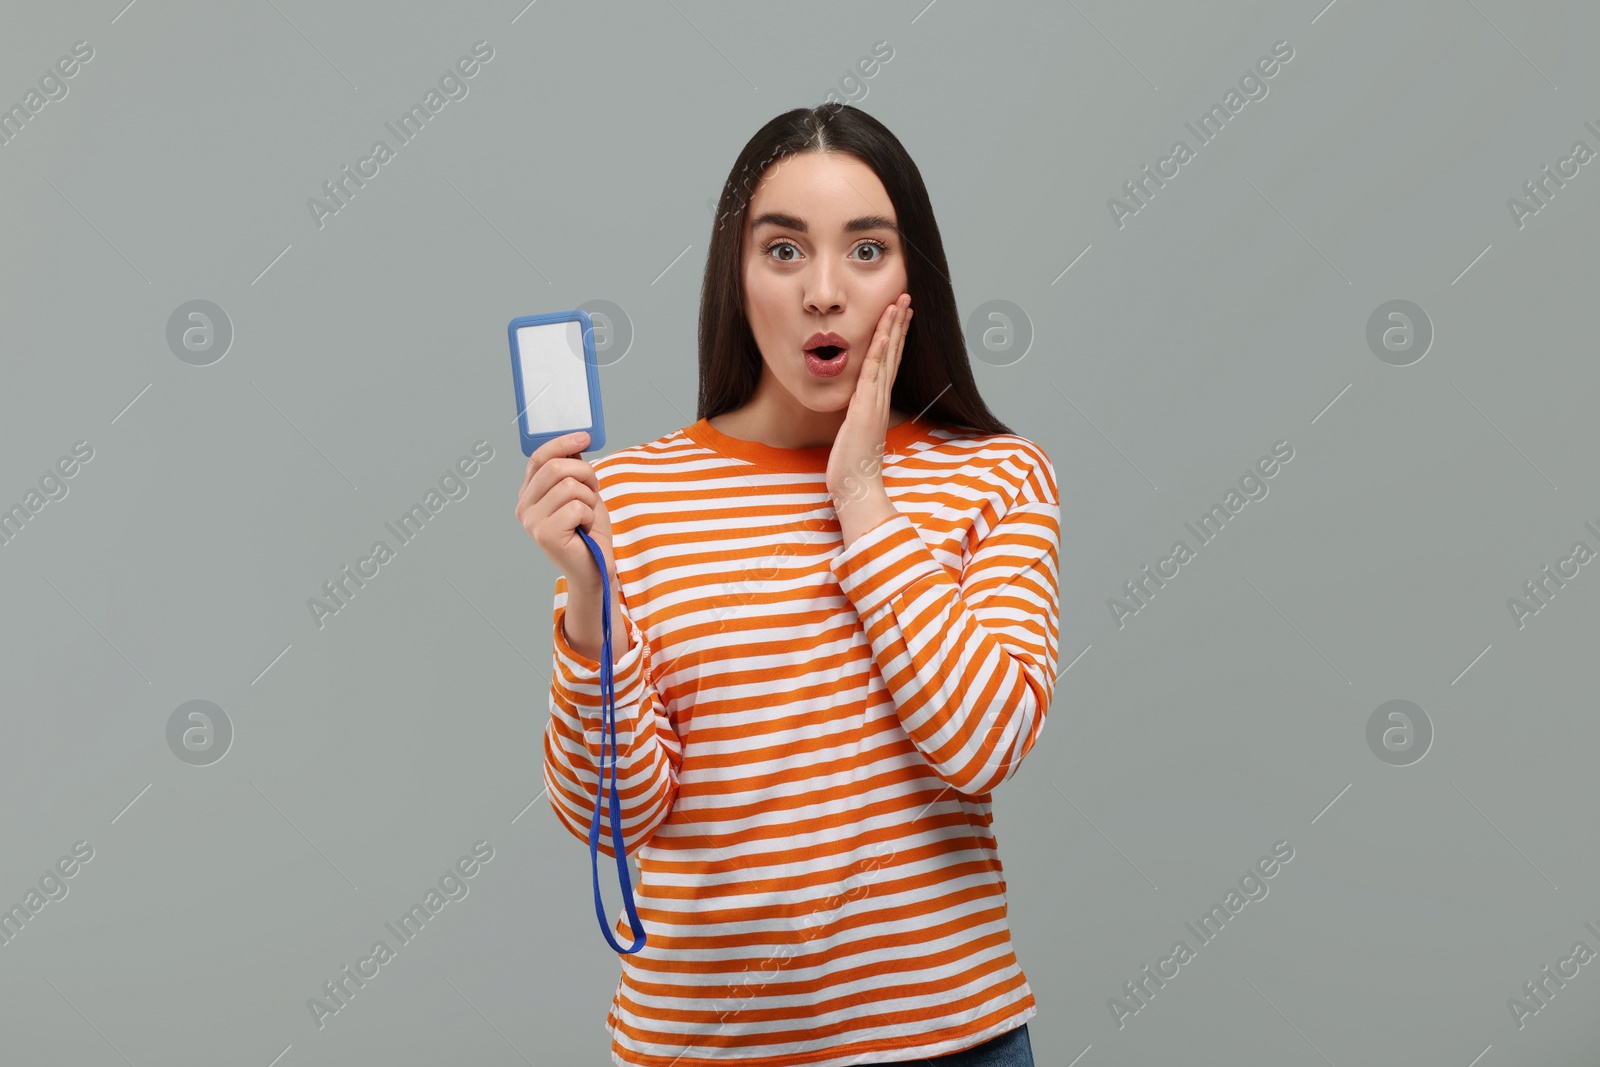 Photo of Emotional woman holding vip pass badge on grey background